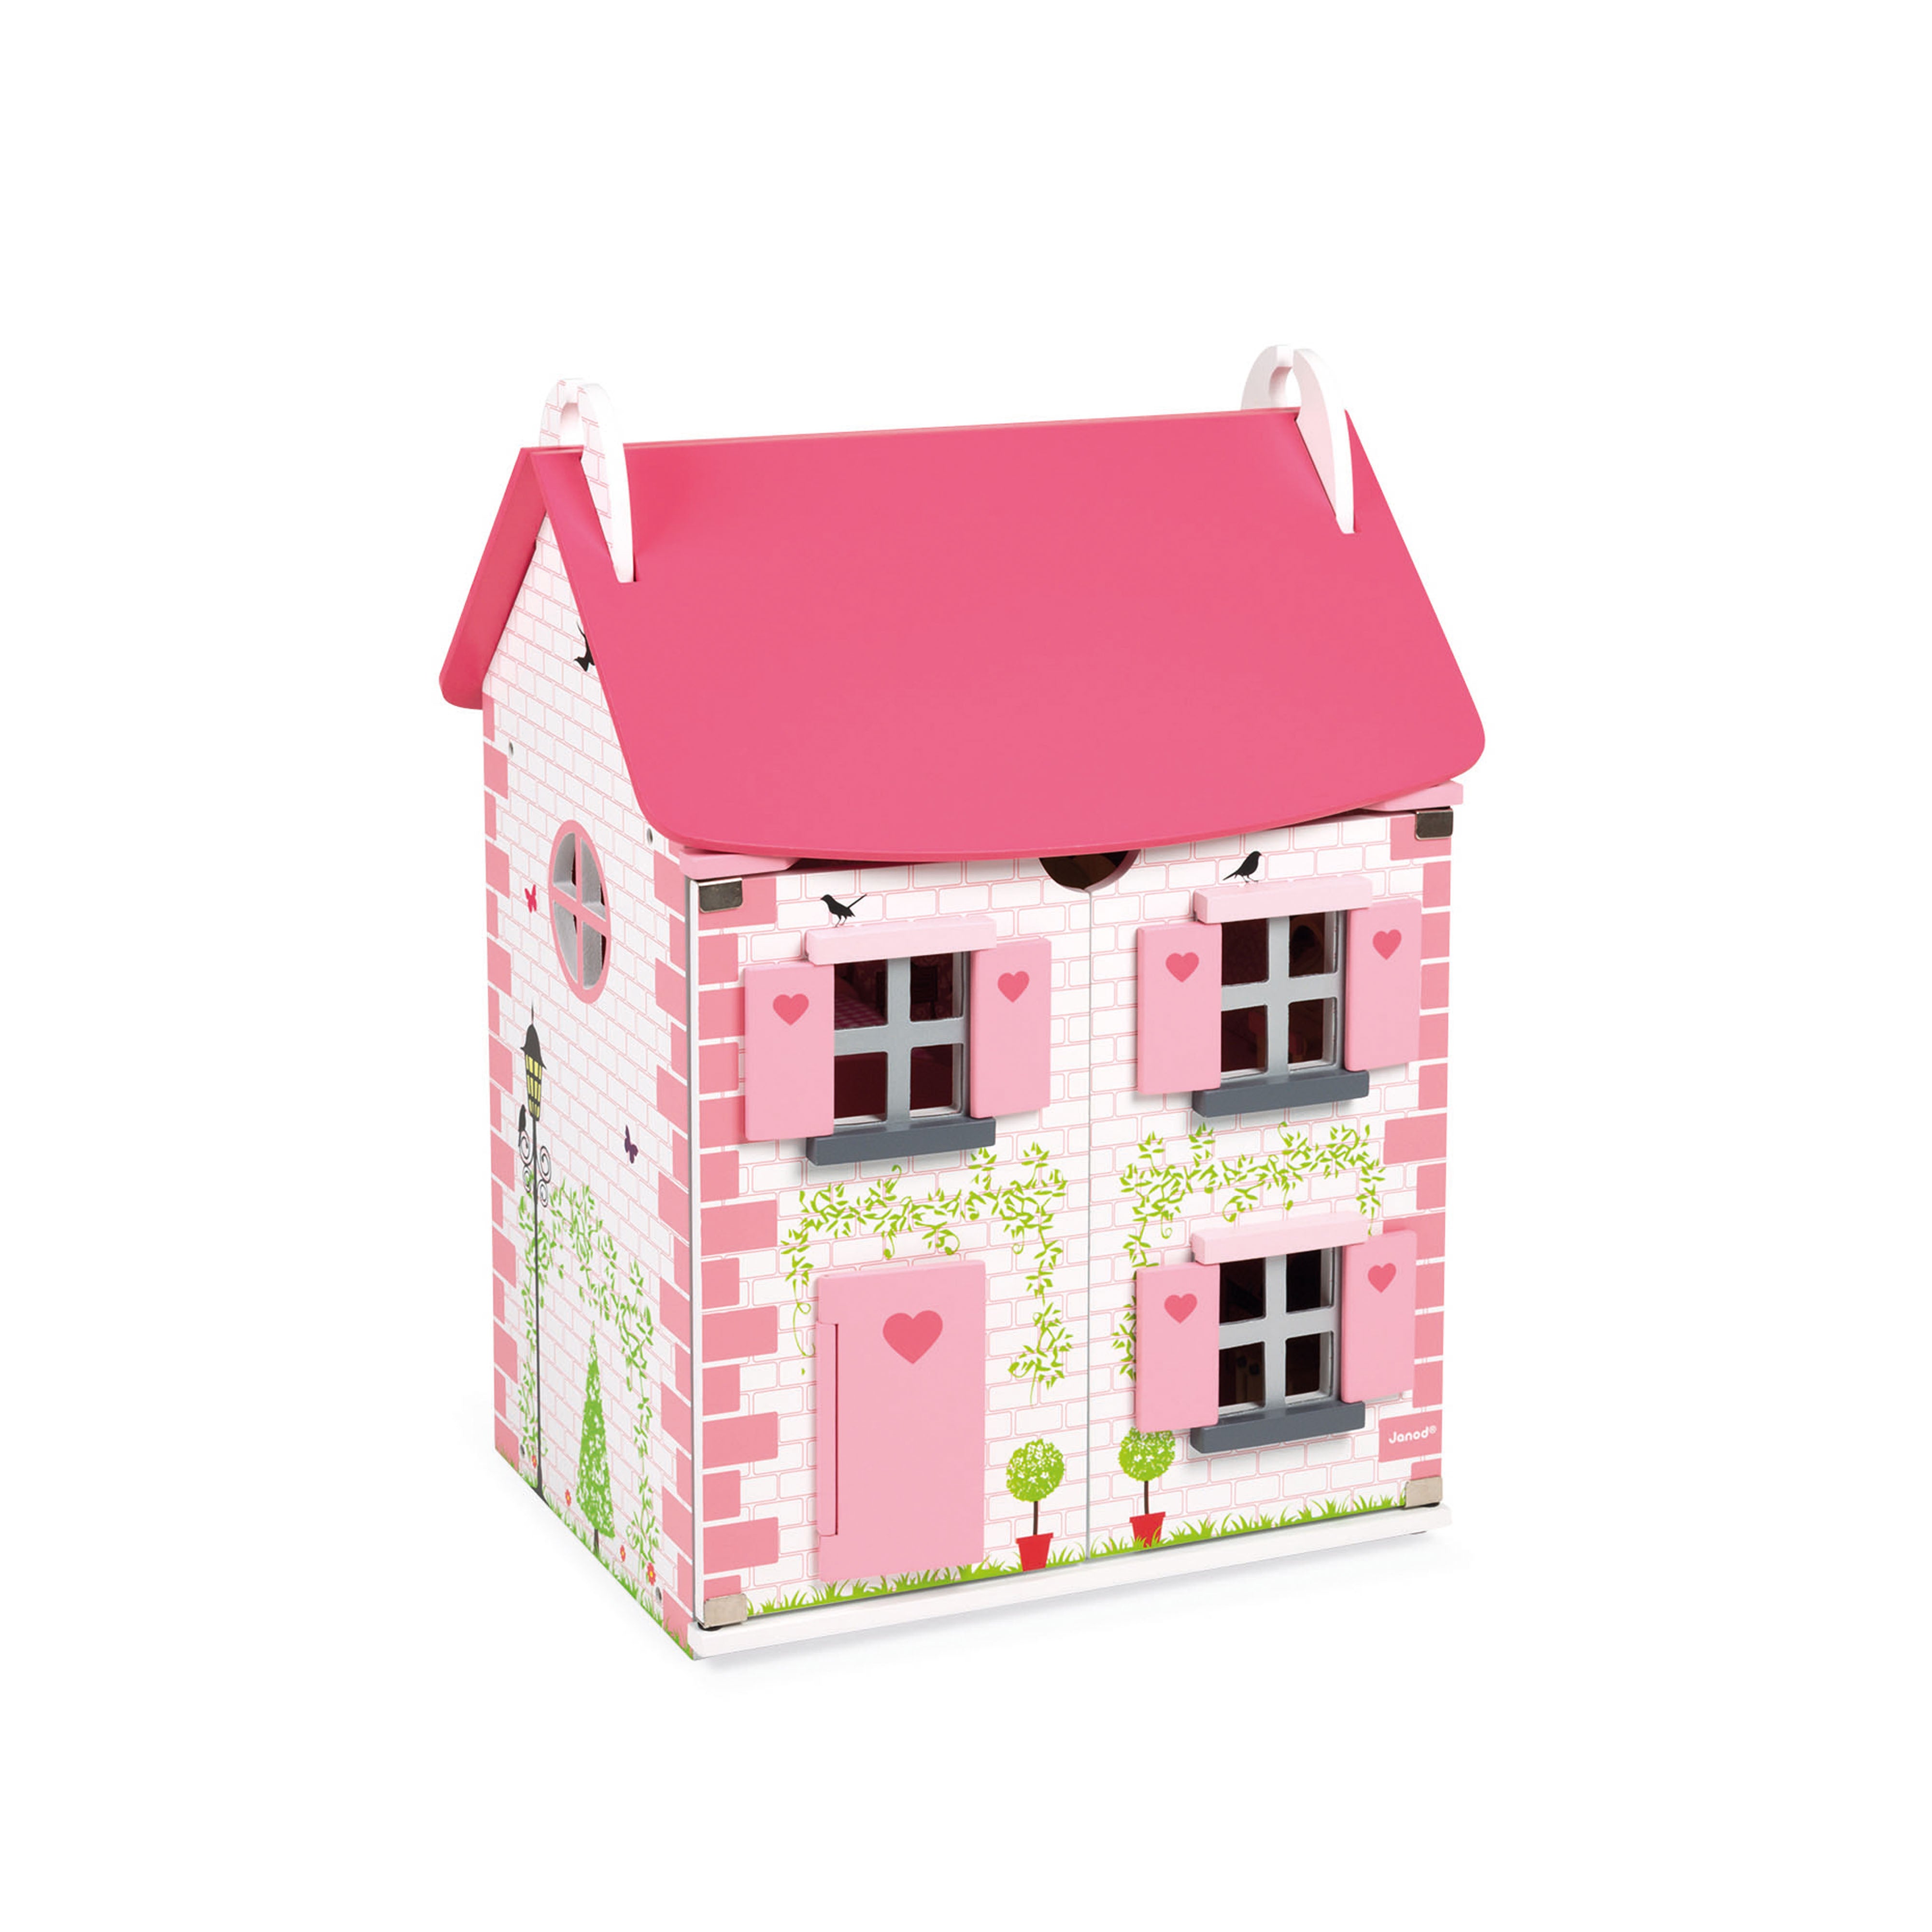 janod-mademoiselle-doll's-house- (4)